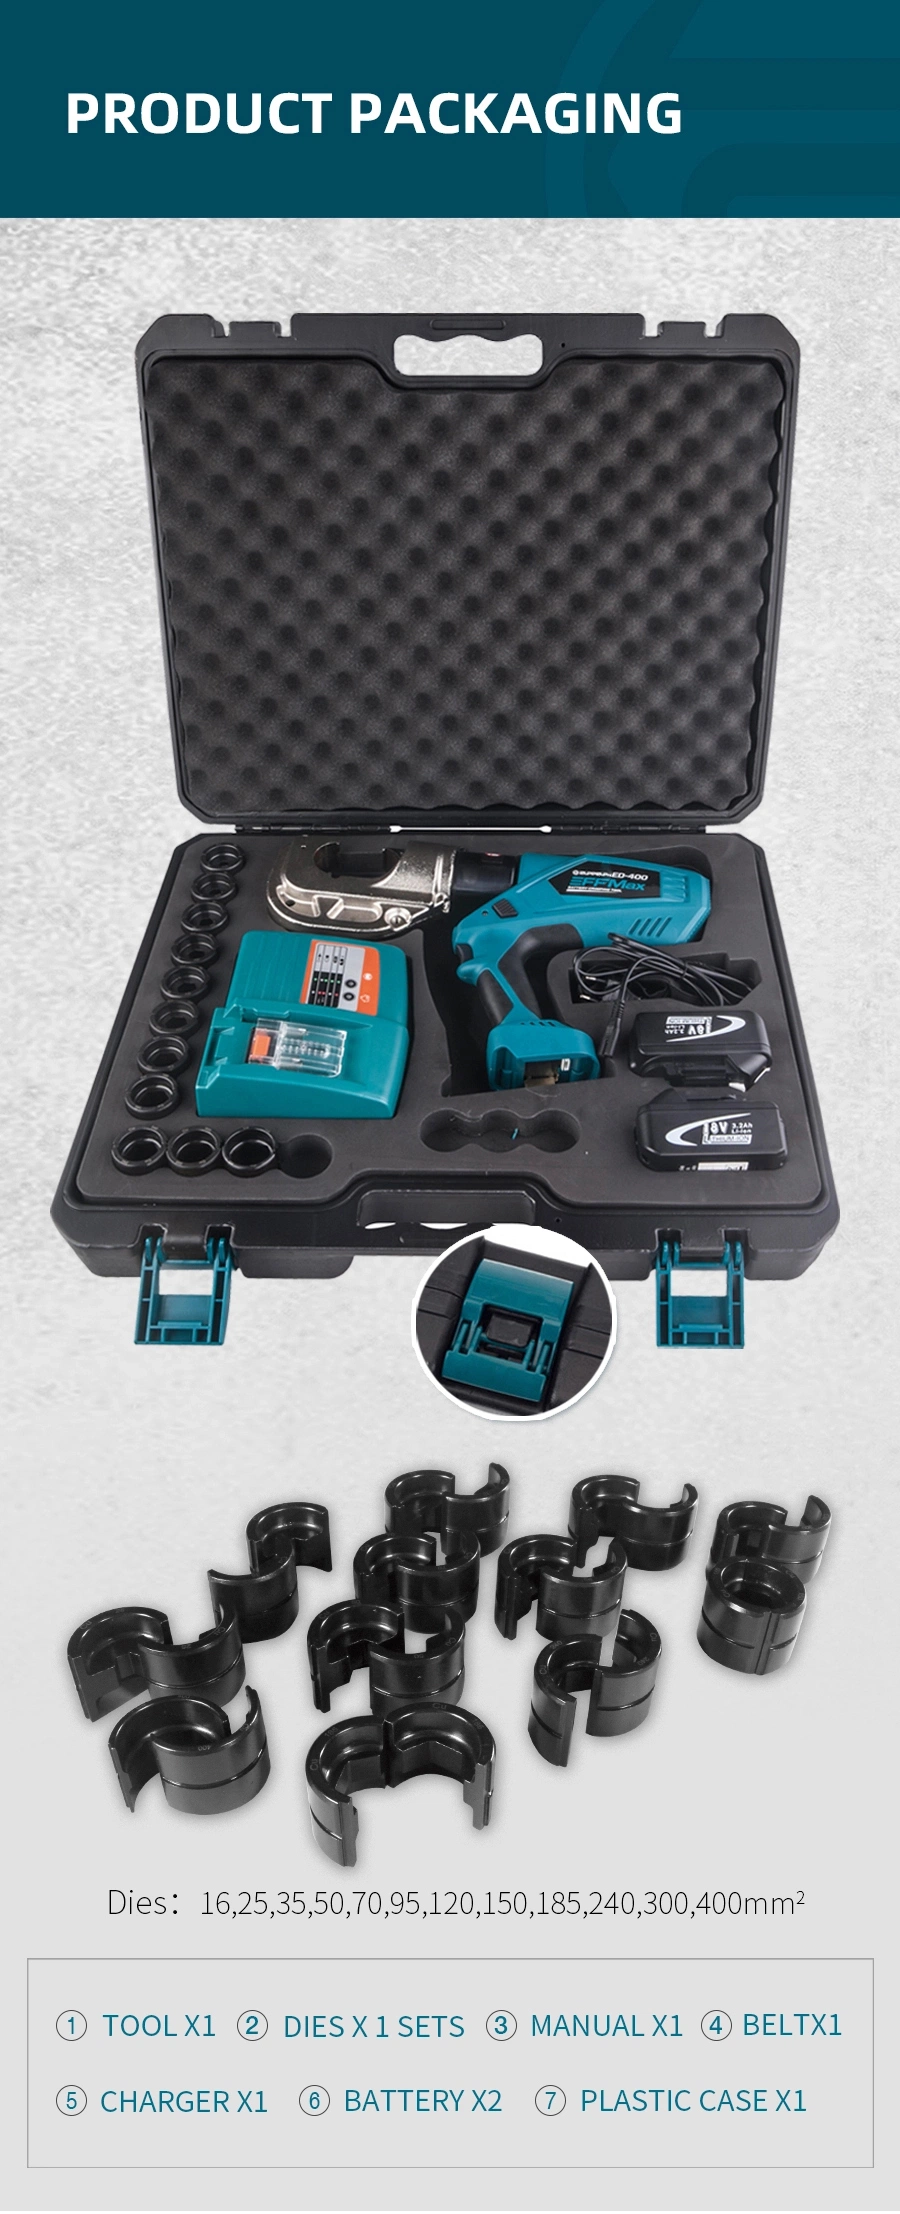 Igeelee ED-400 Mini Hydraulic Battery Crimping Tool for Cable Lug